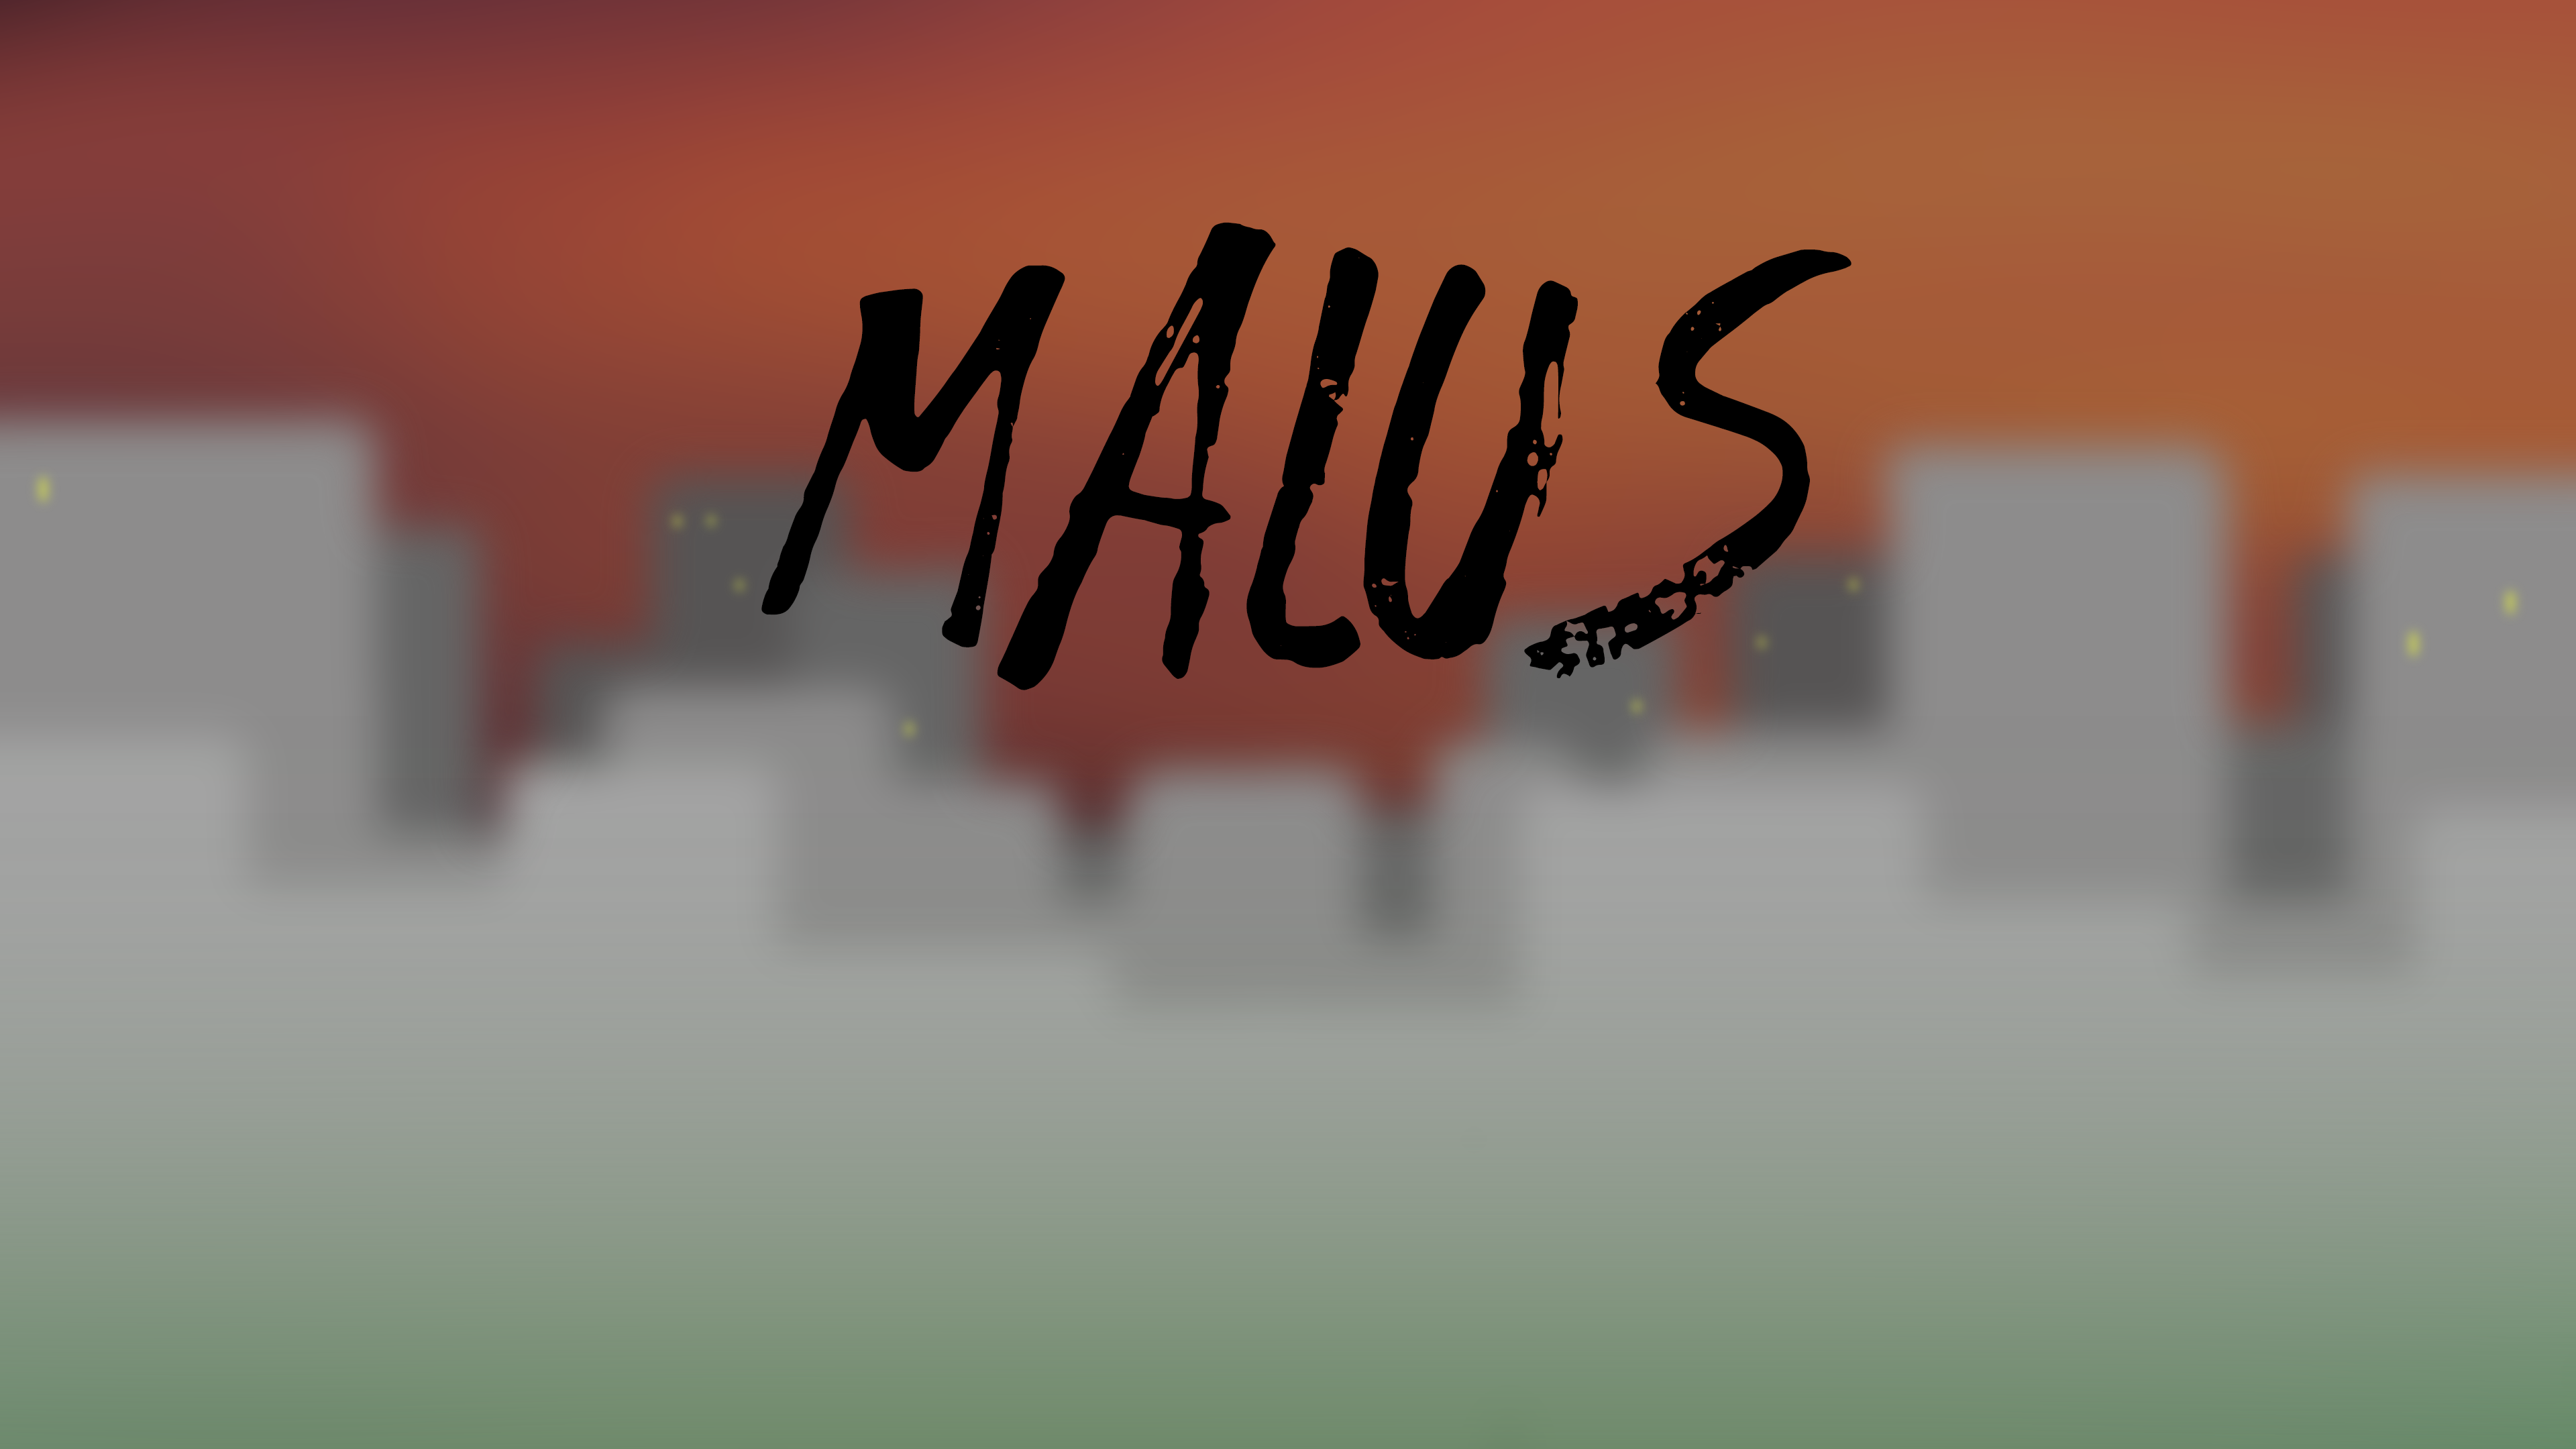 Malus - A survival Game